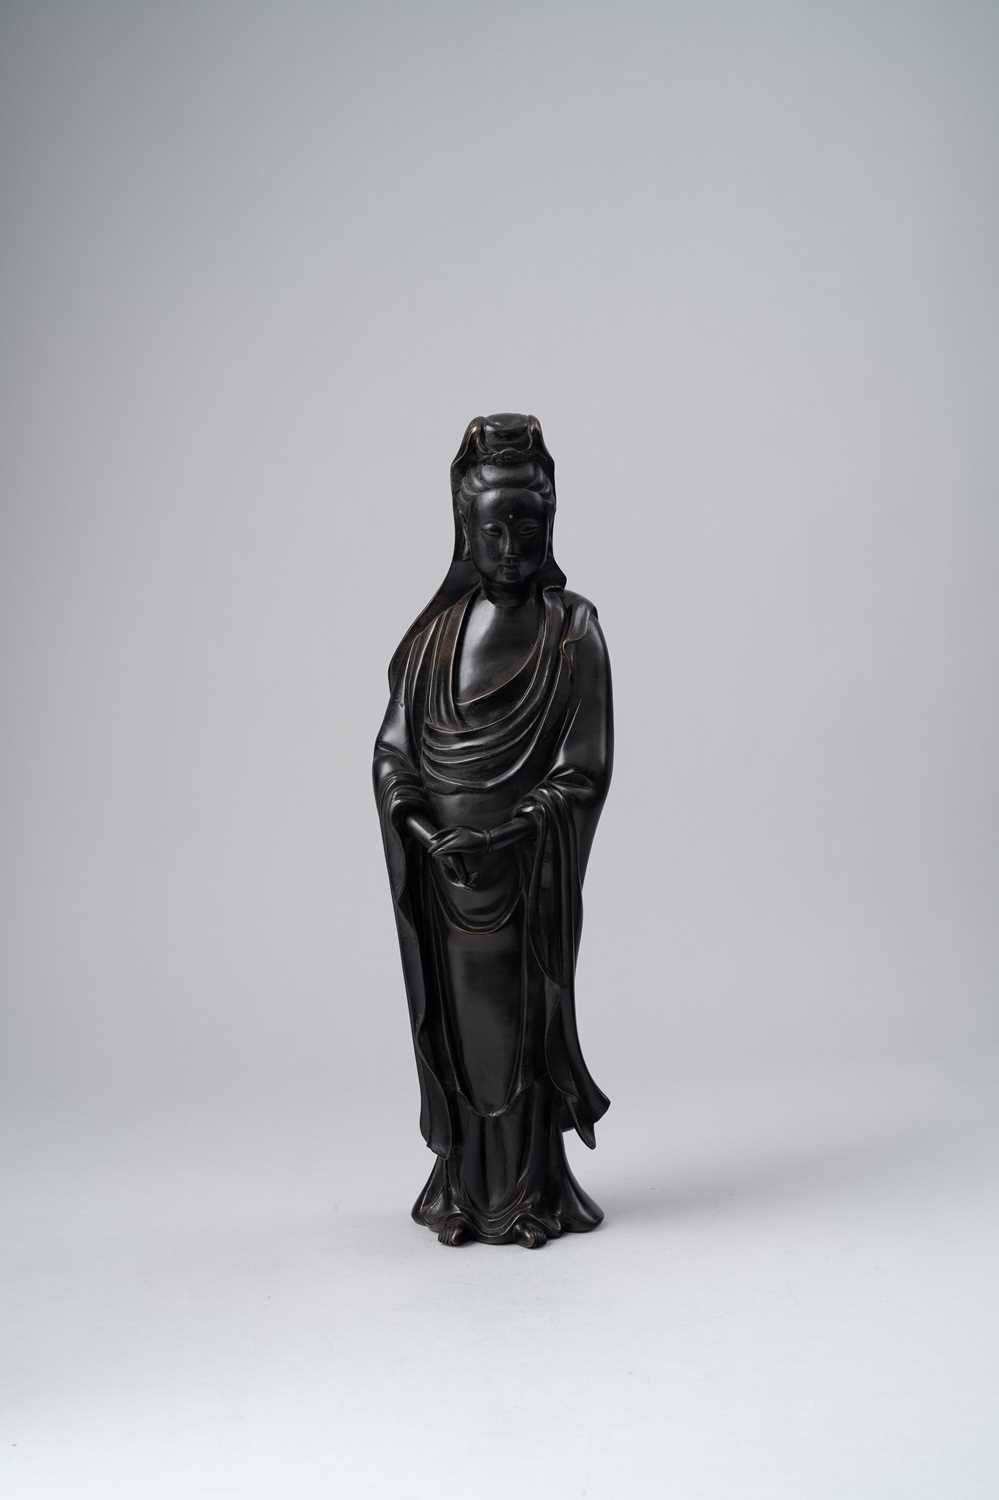 A CHINESE SILVER-INLAID 'SHI SOU' STYLE BRONZE FIGURE OF GUANYIN LATE MING DYNASTY Standing with